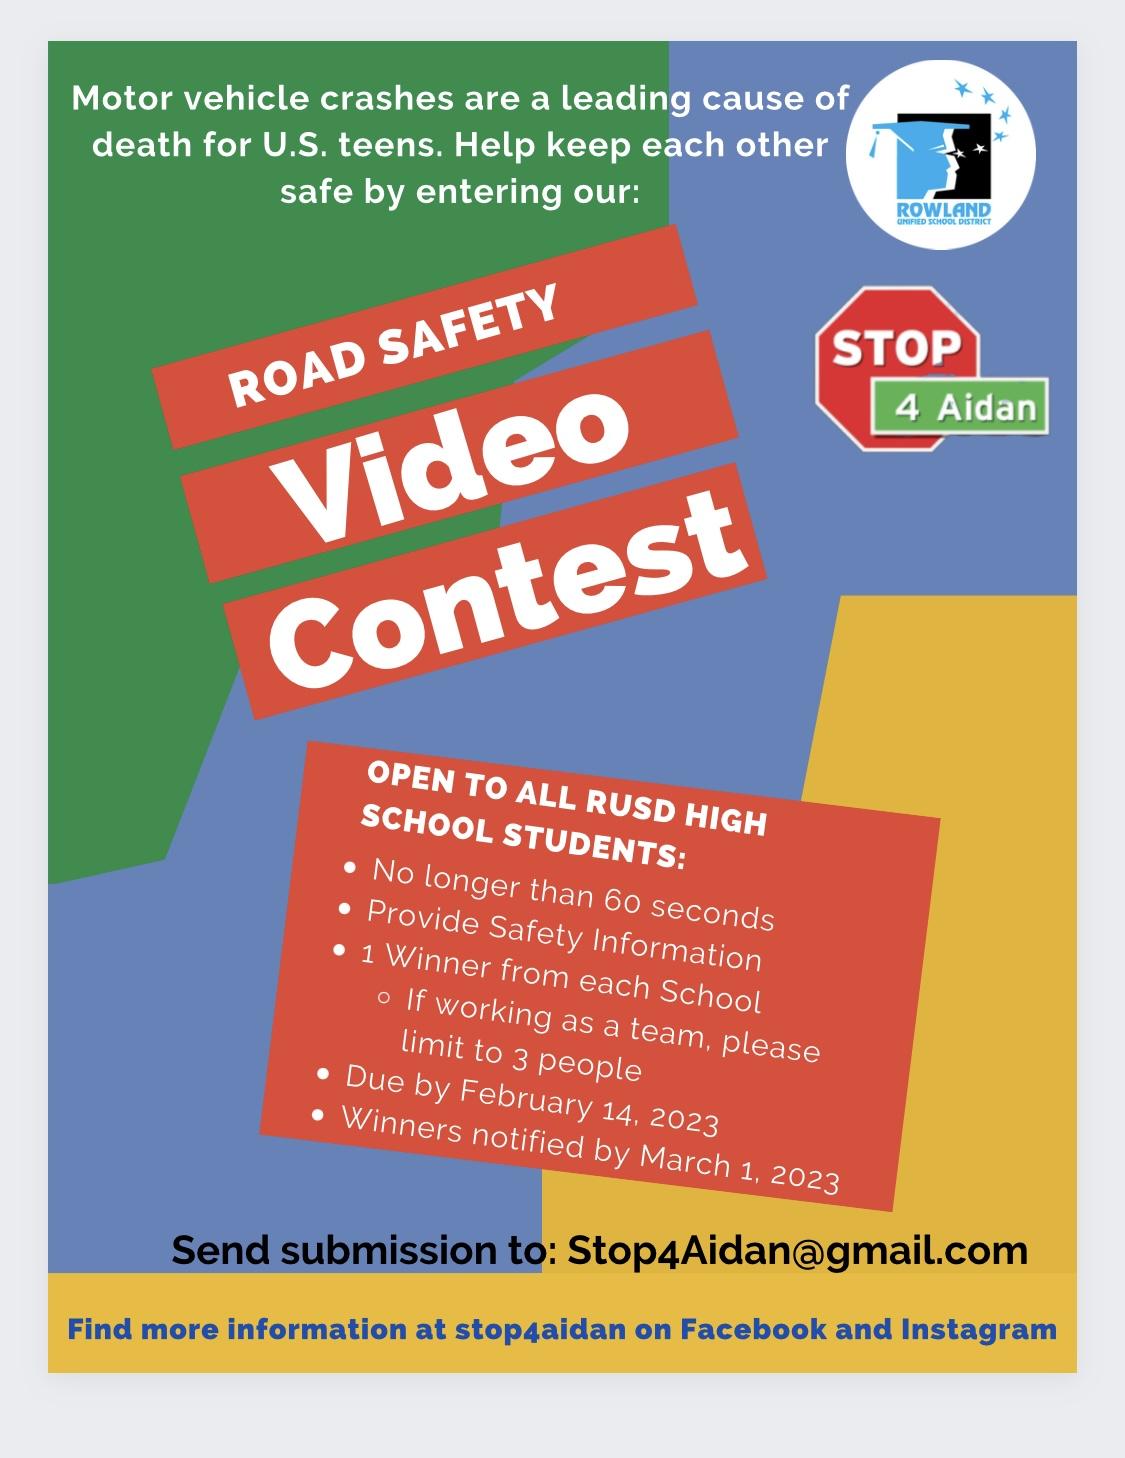 Road Safety Video Contest